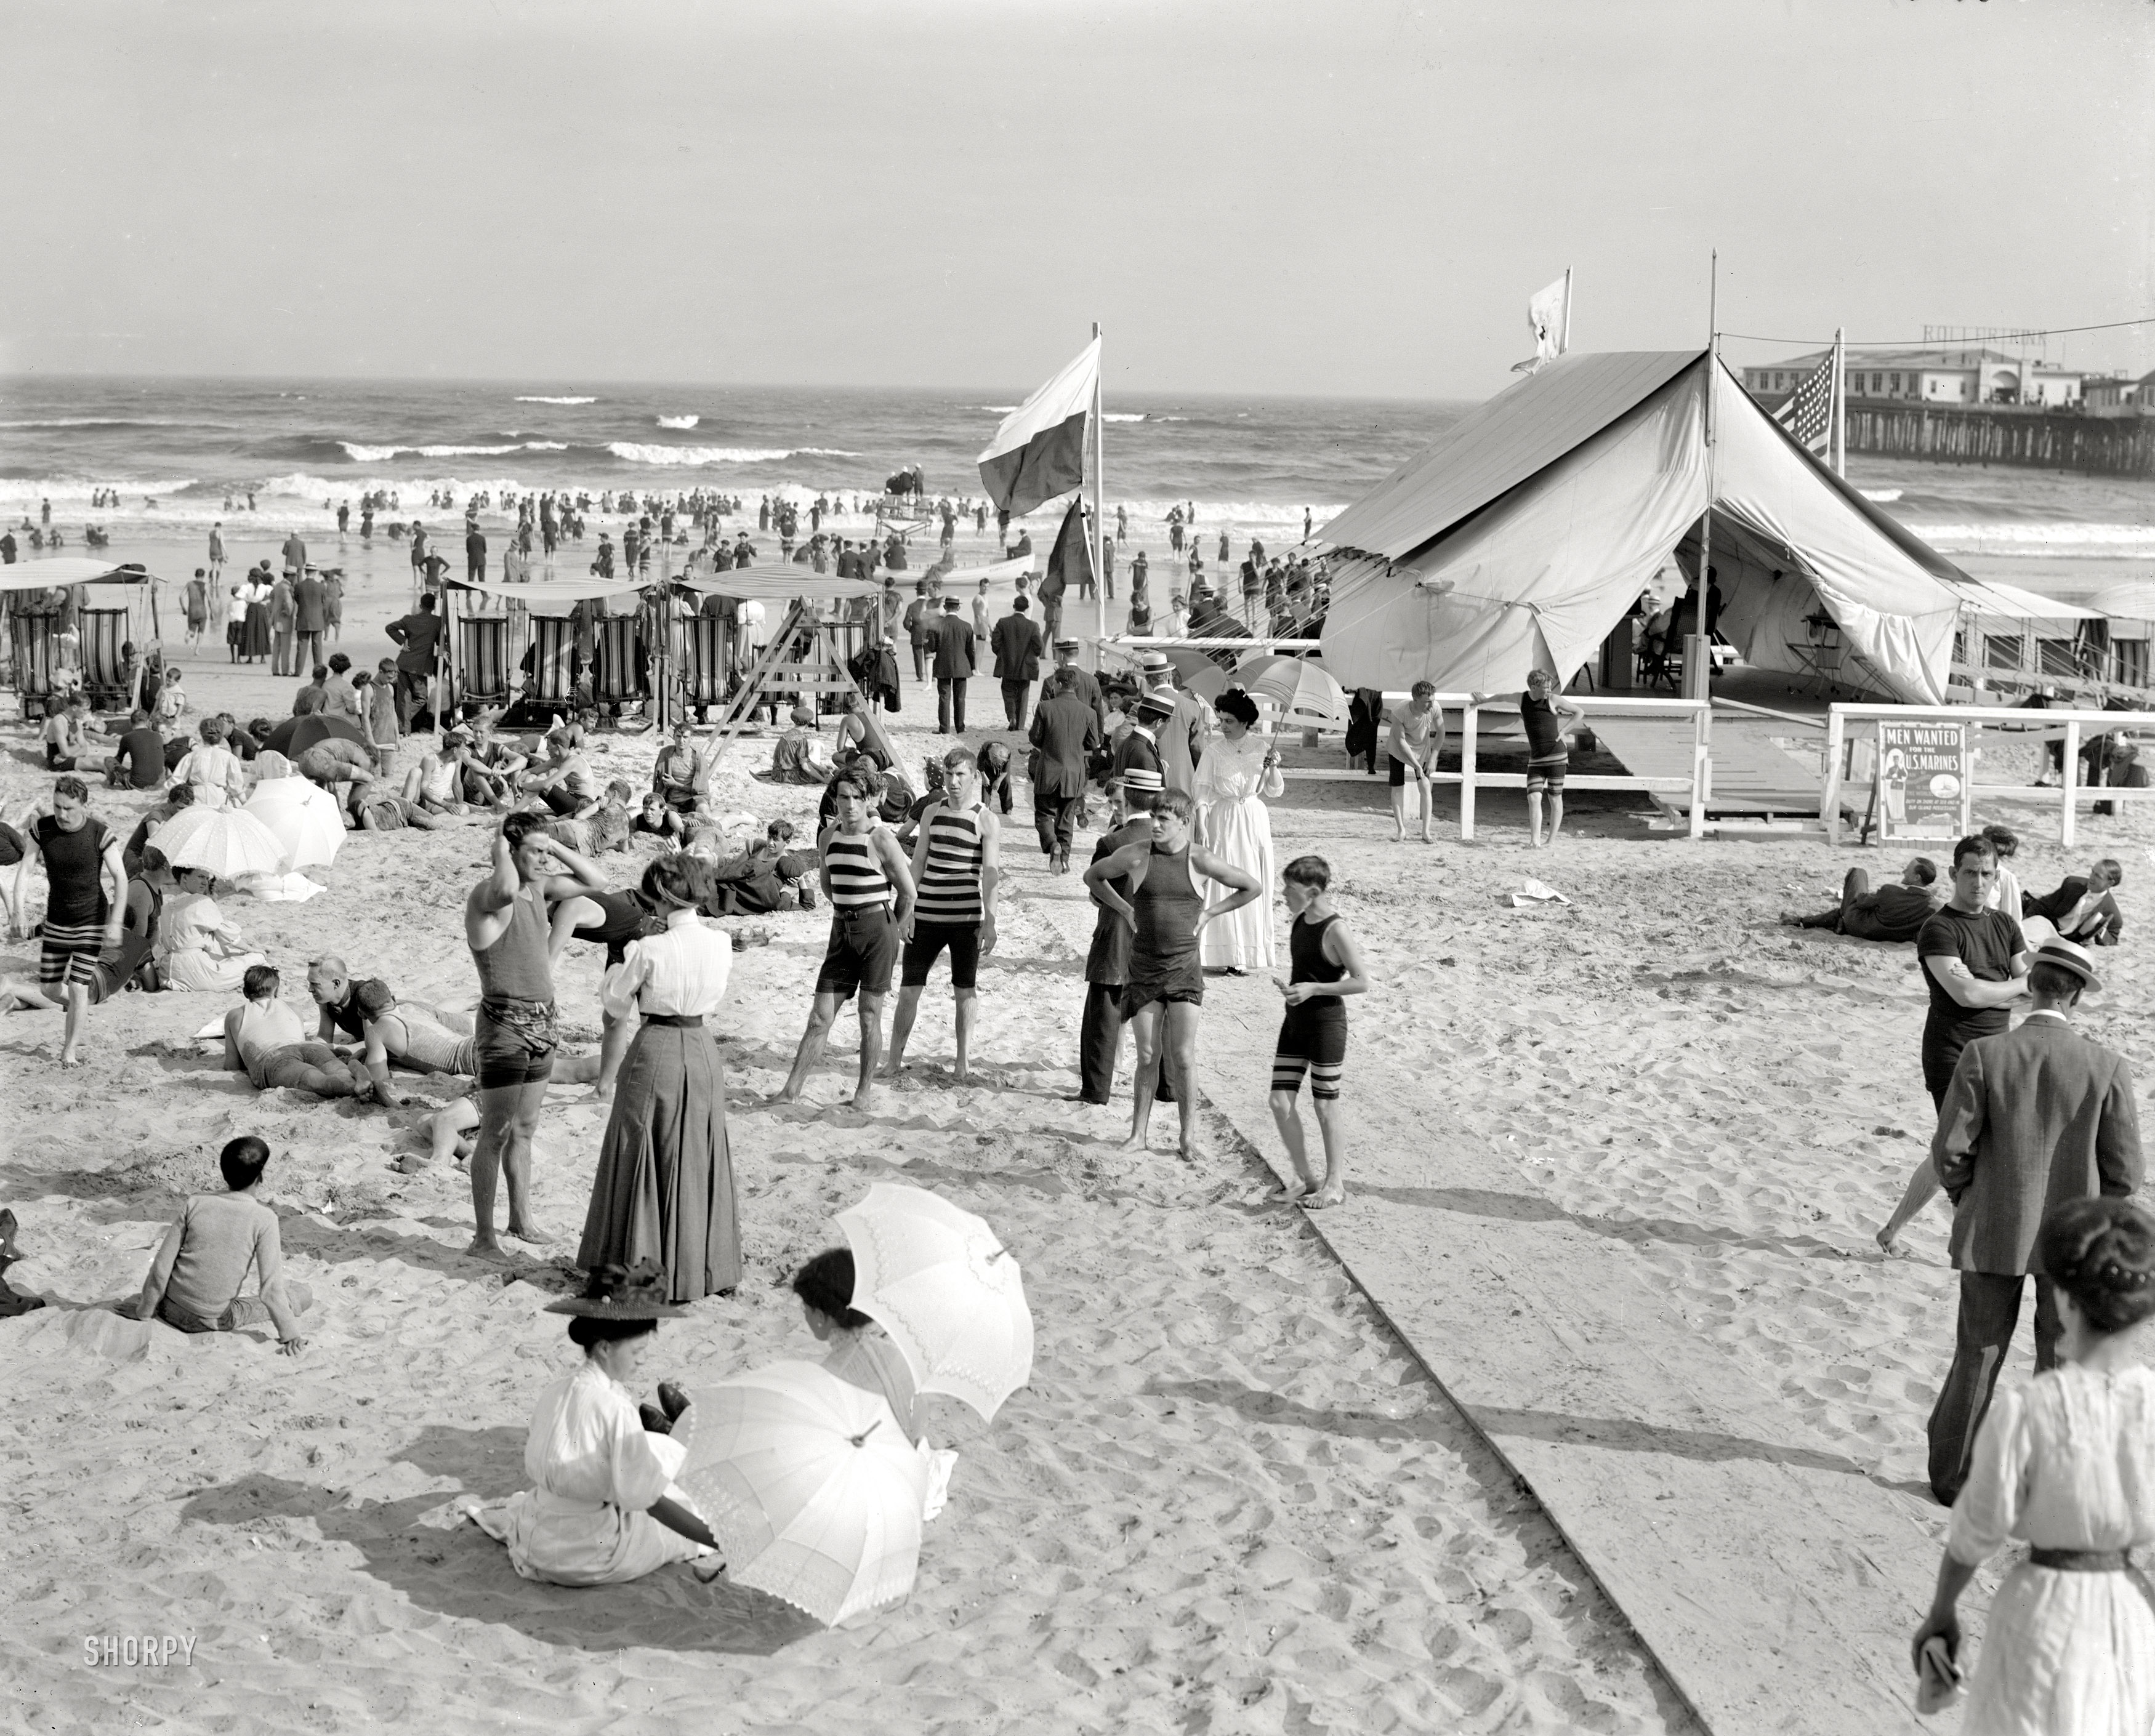 The Jersey Shore circa 1910, continuing our theme of waterfront scenes with stripes. "Bathing at Atlantic City." 8x10 inch dry plate glass negative, Detroit Publishing Company. View full size or fast-forward a few years.